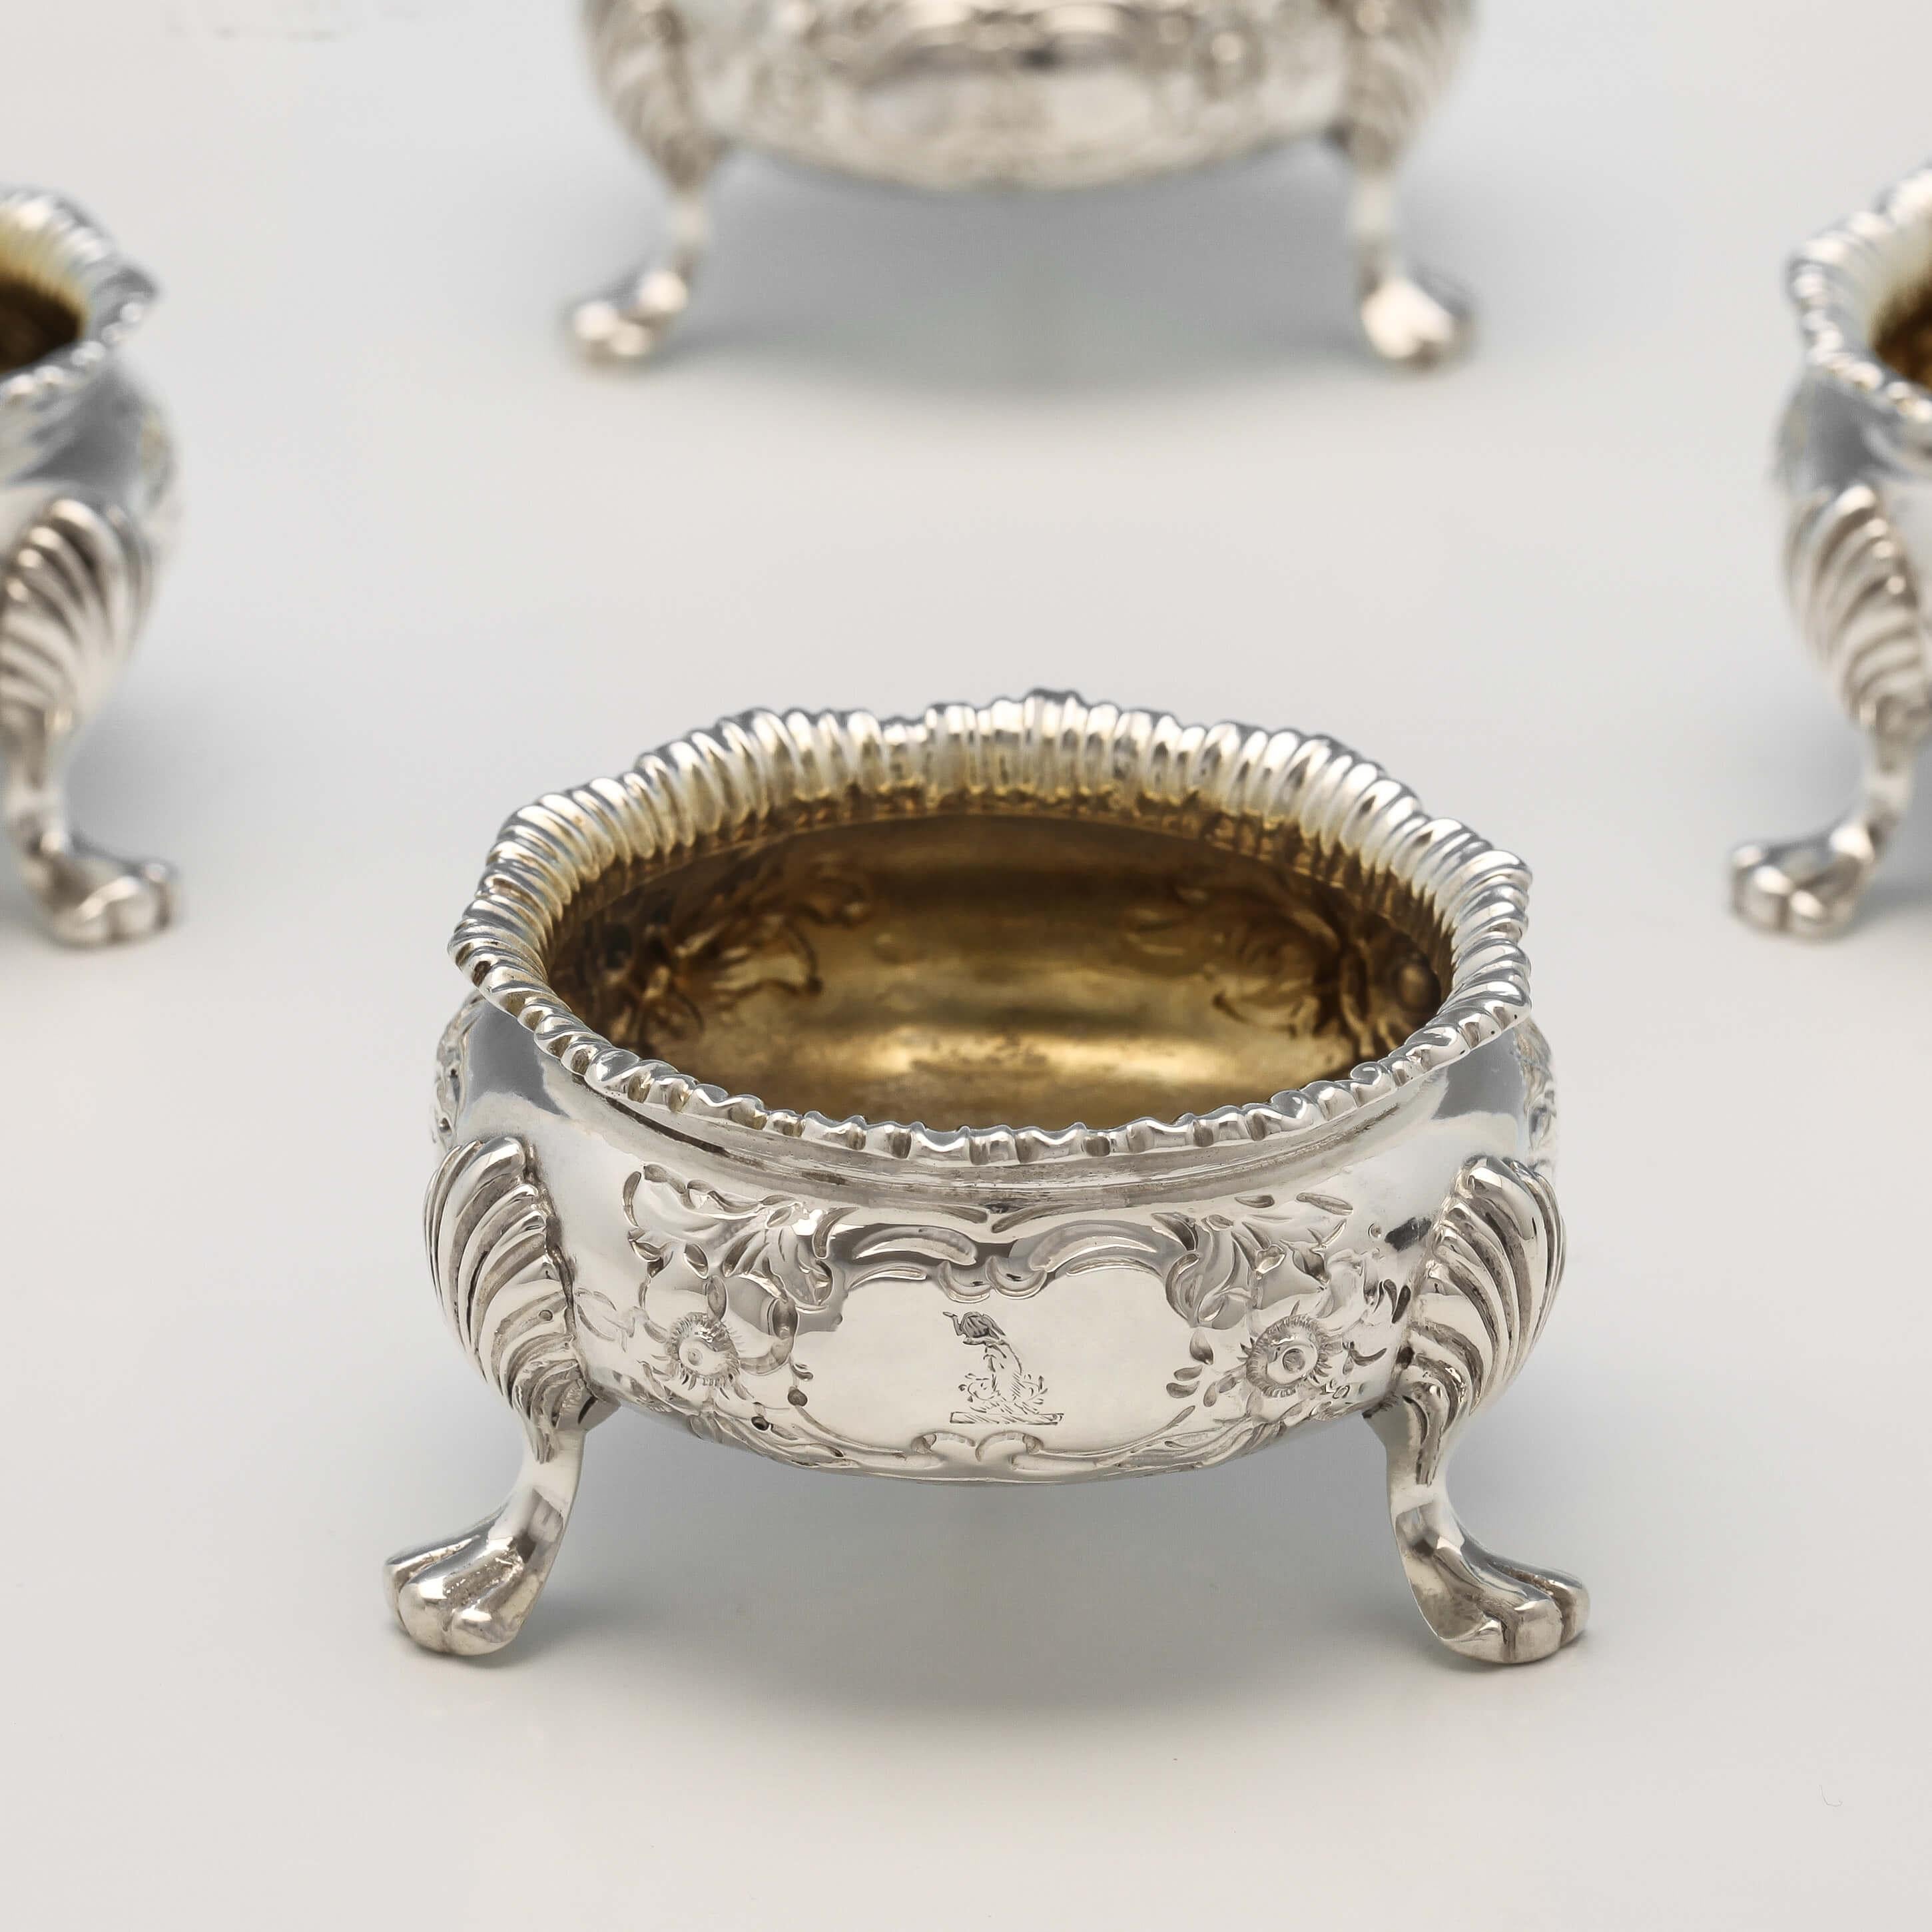 Hallmarked in London in 1892 by Charles Stuart Harris, this lovely set of 10 antique, Victorian, sterling silver salt cellars, are in the cauldron style with pretty floral chasing, paw feet, and gilt interiors. Each salt cellar measures 1.25